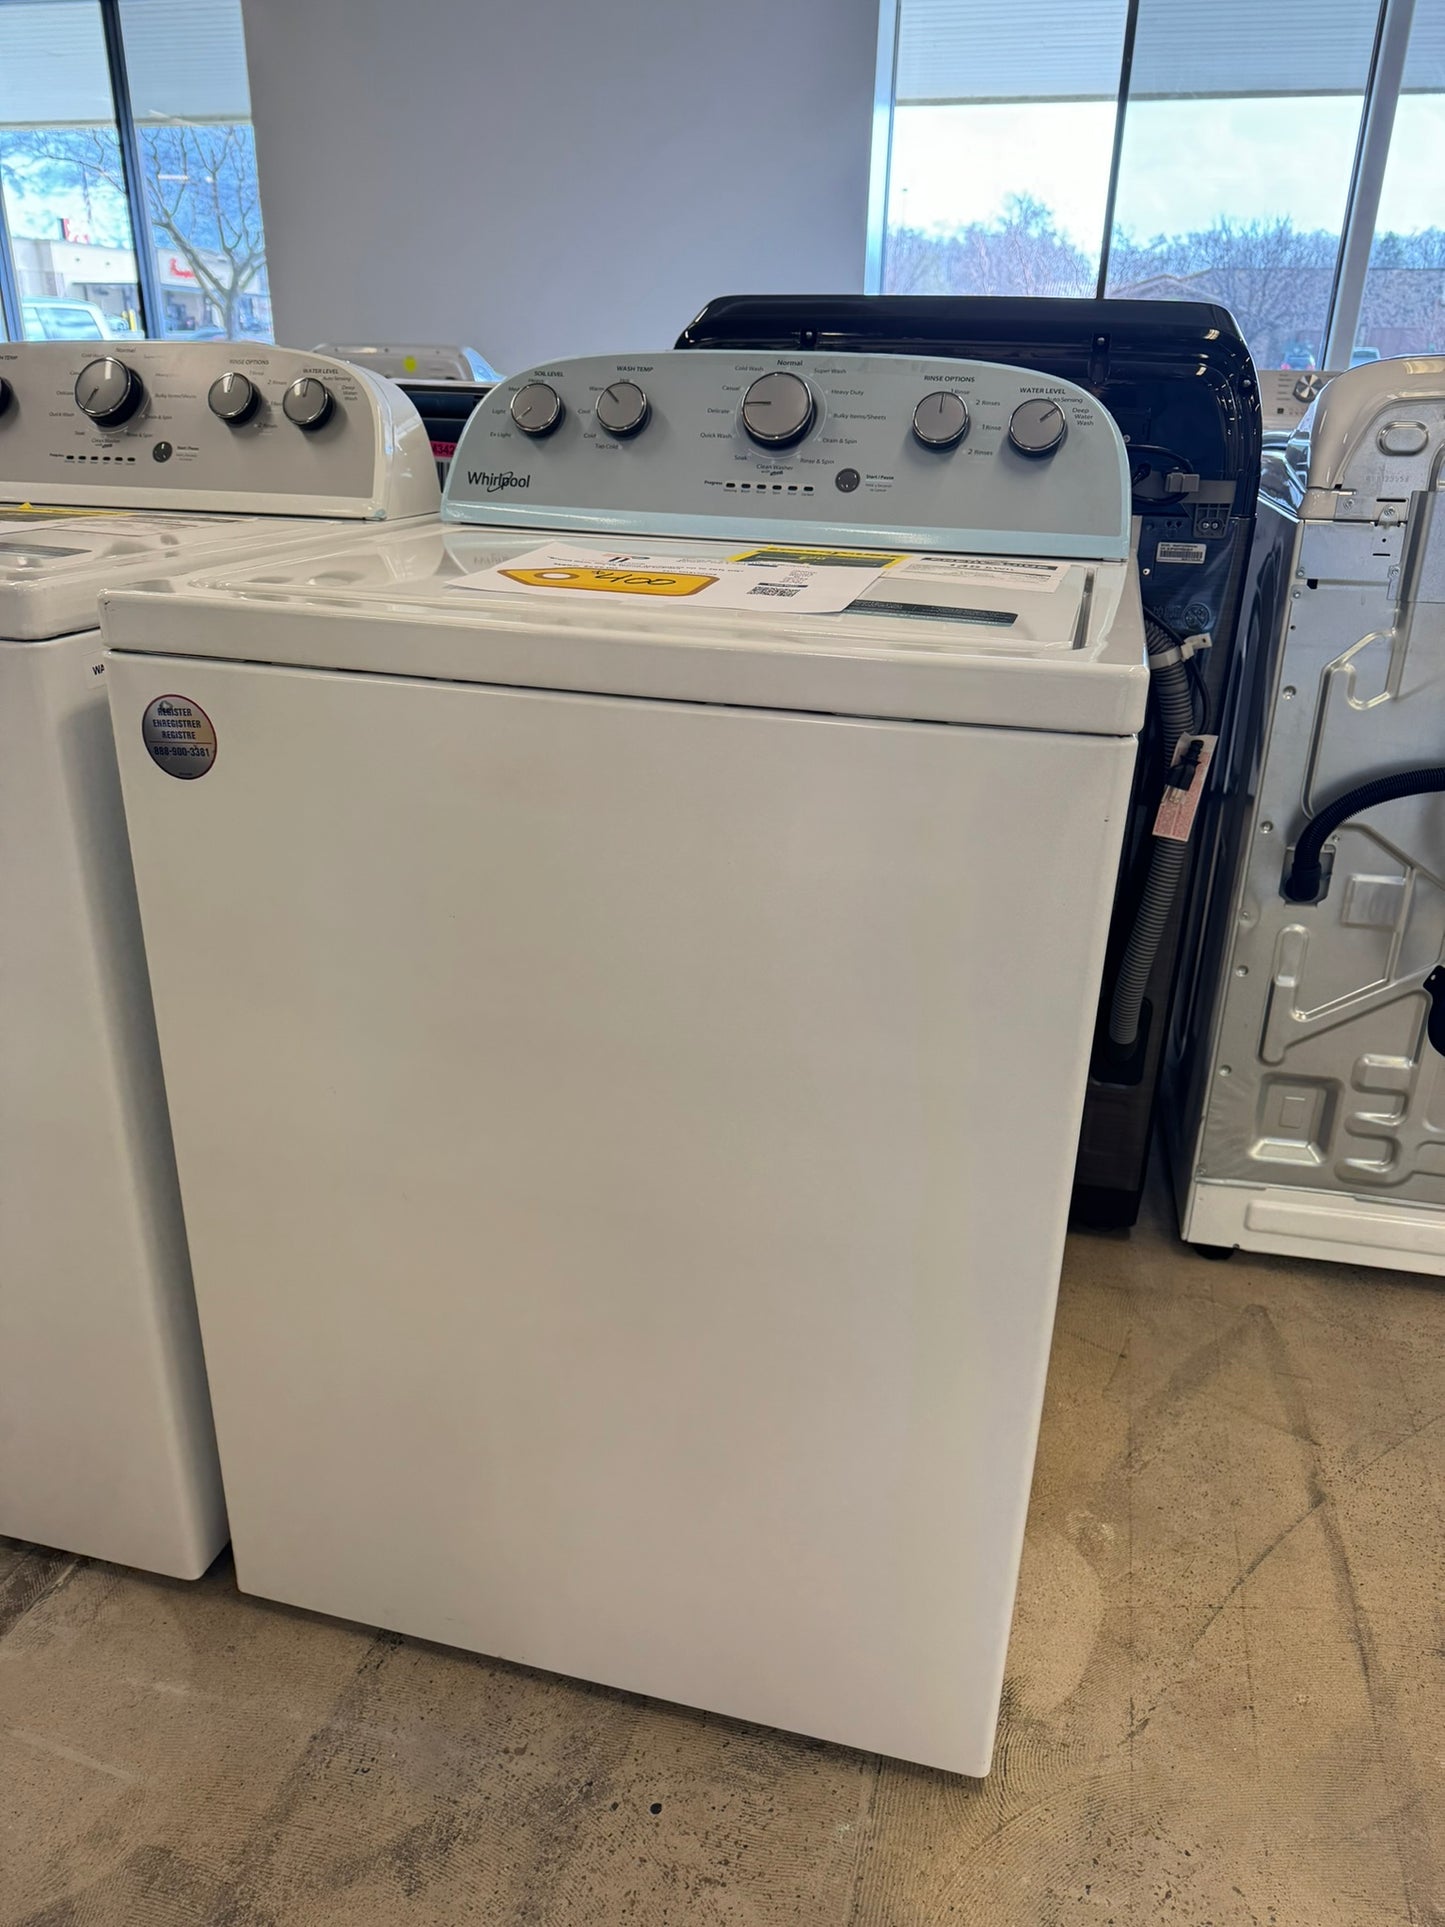 BRAND NEW TOP LOADING WHIRLPOOL WASHER MODEL: WTW4816FW  WAS10020R